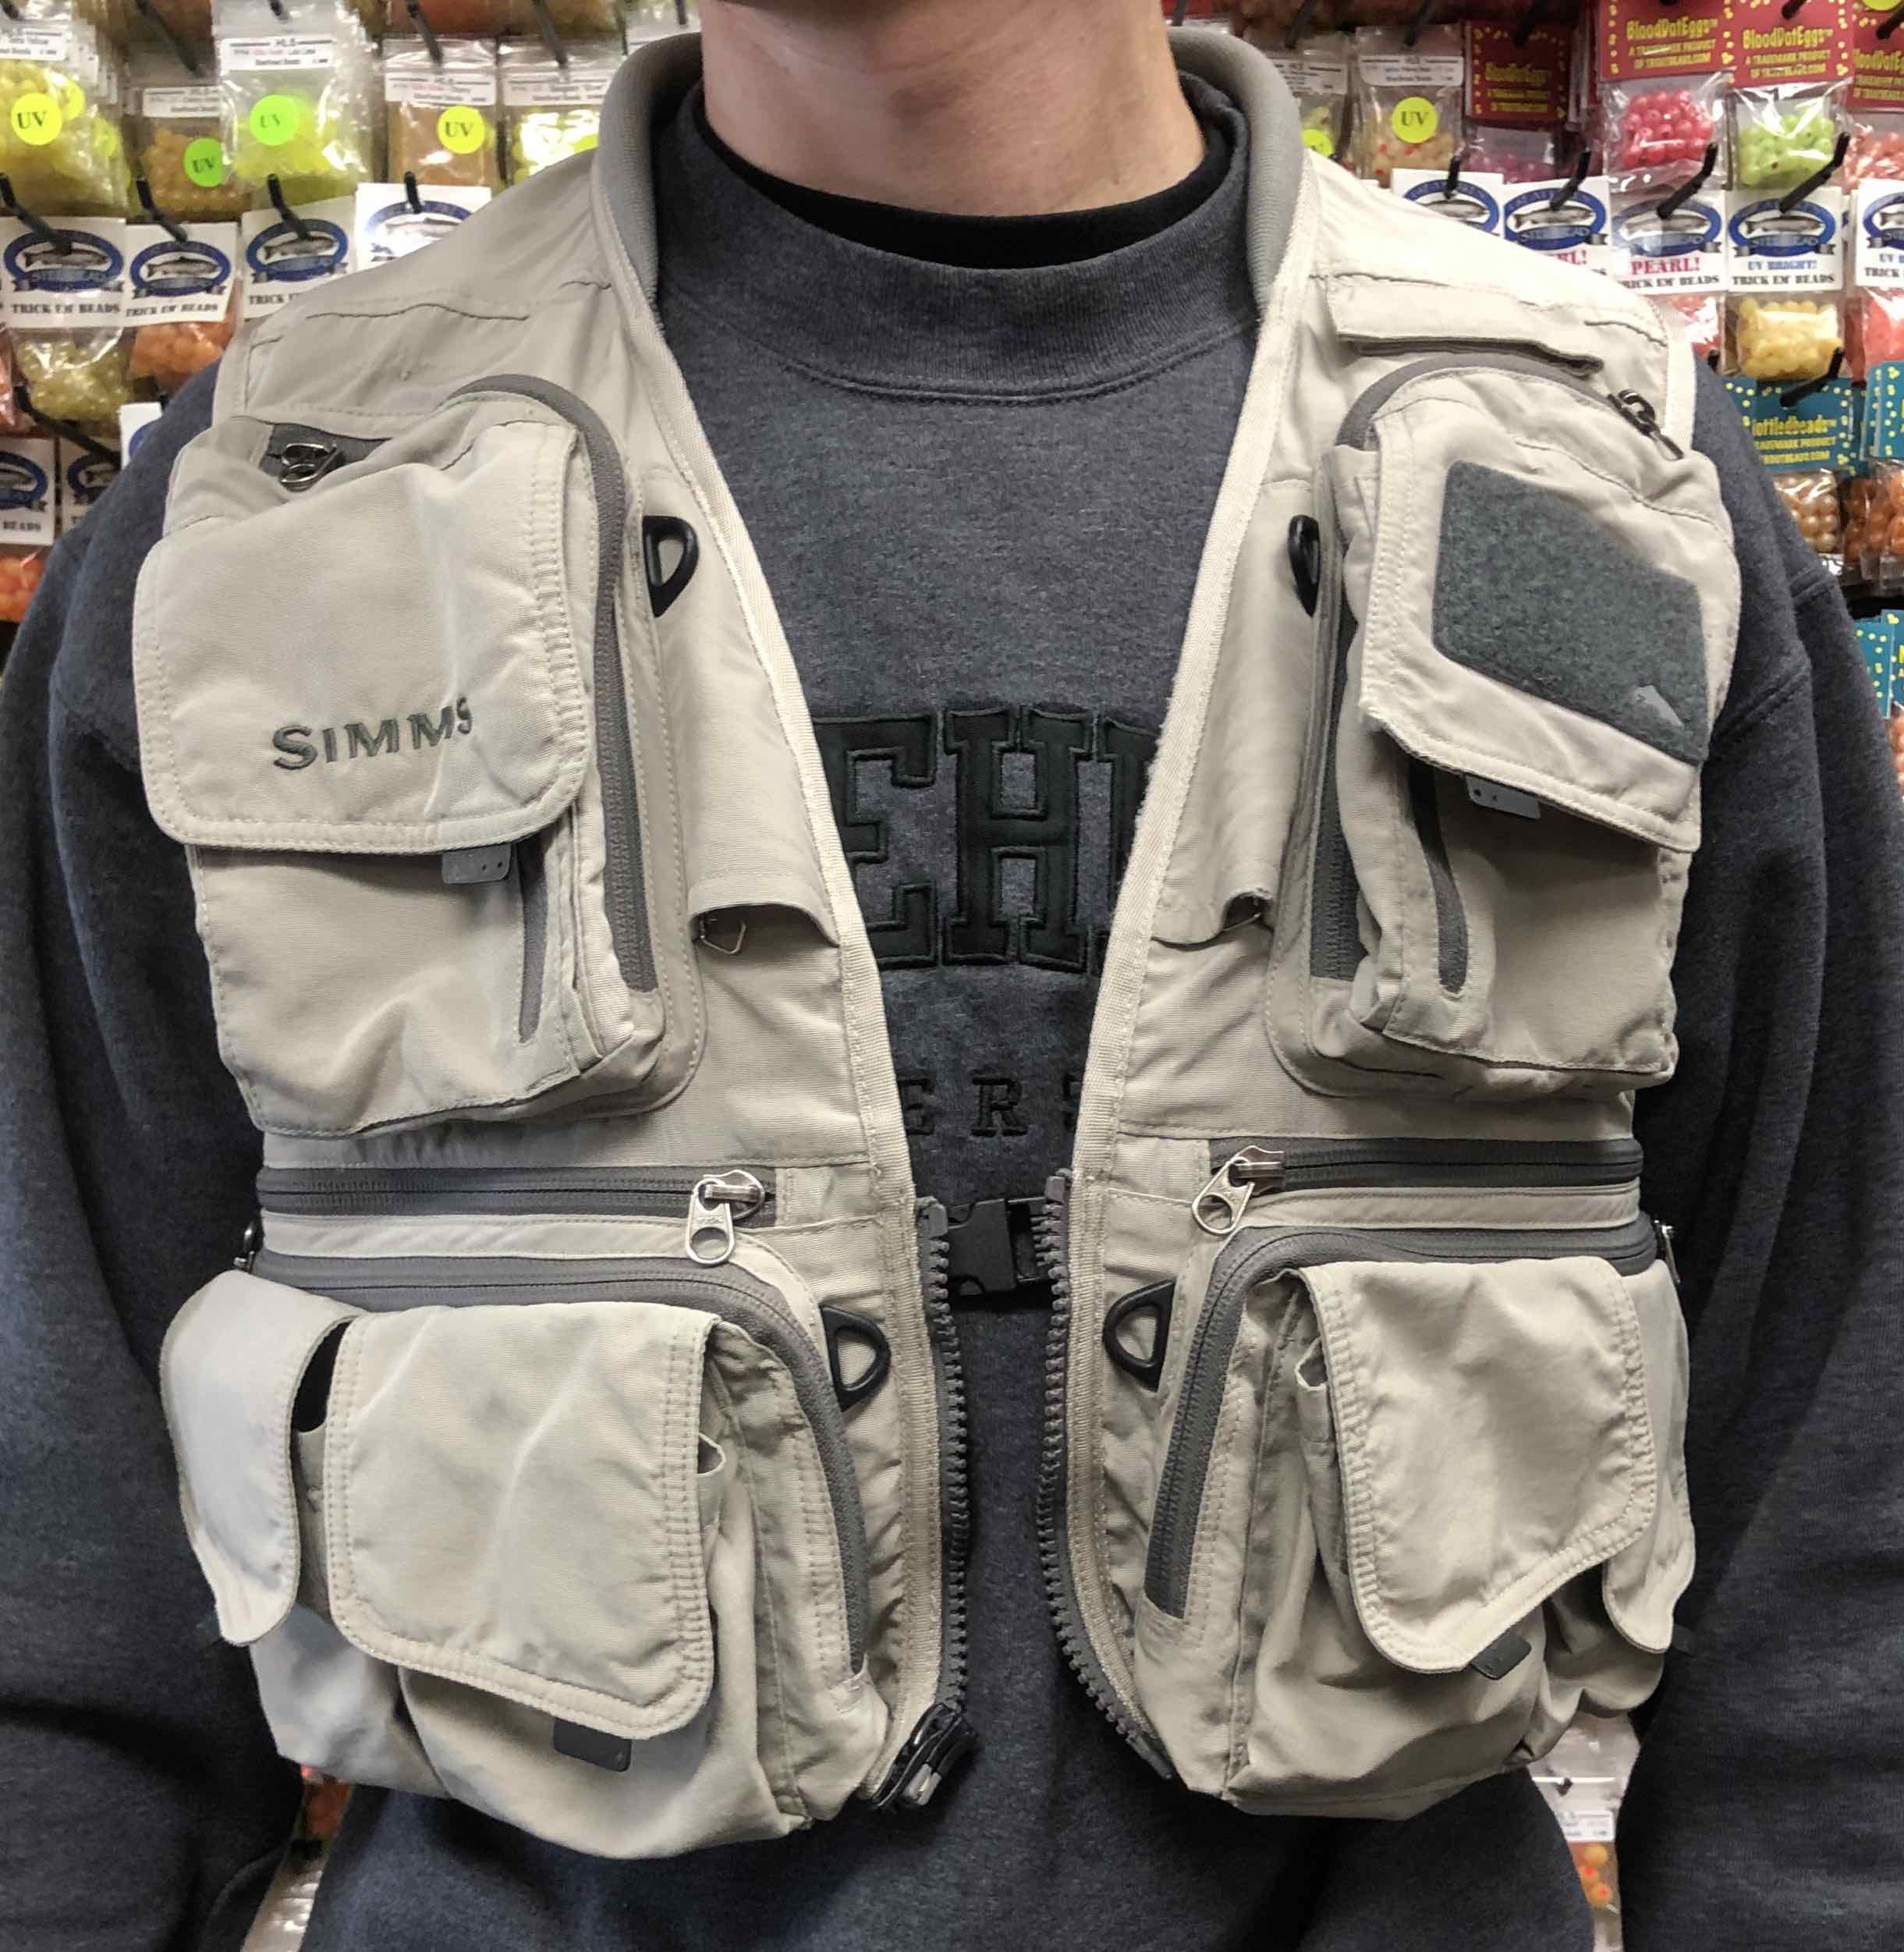 Simms G3 Guide Vest - Size Small - GREAT SHAPE! - $75